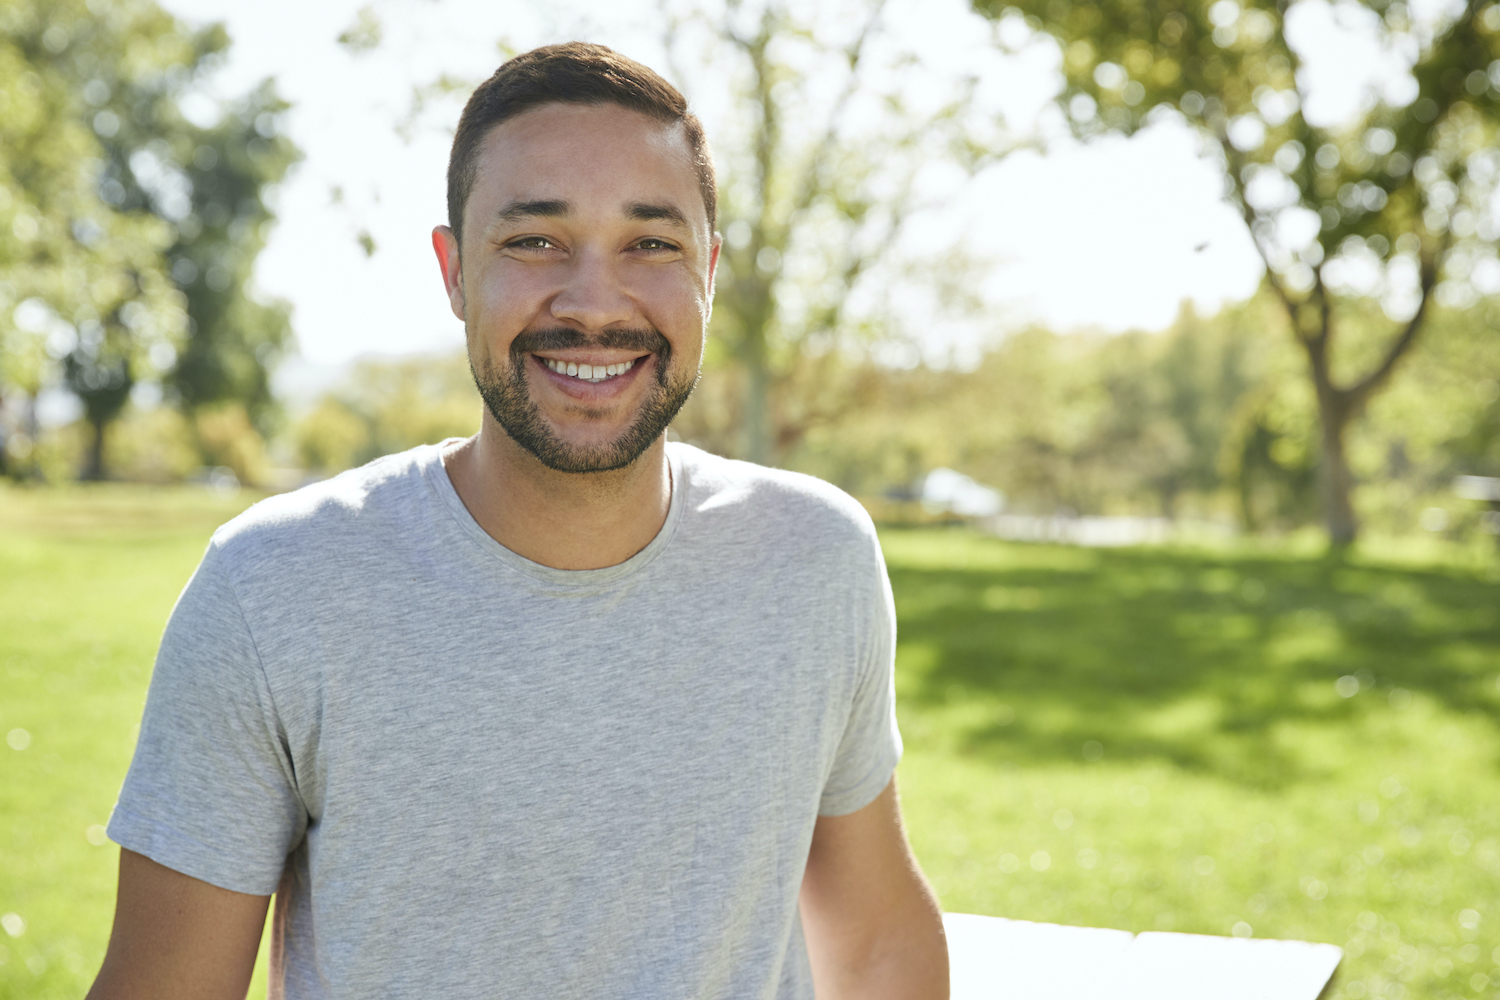 Outdoor Head And Shoulders Portrait Of Smiling Man In Park